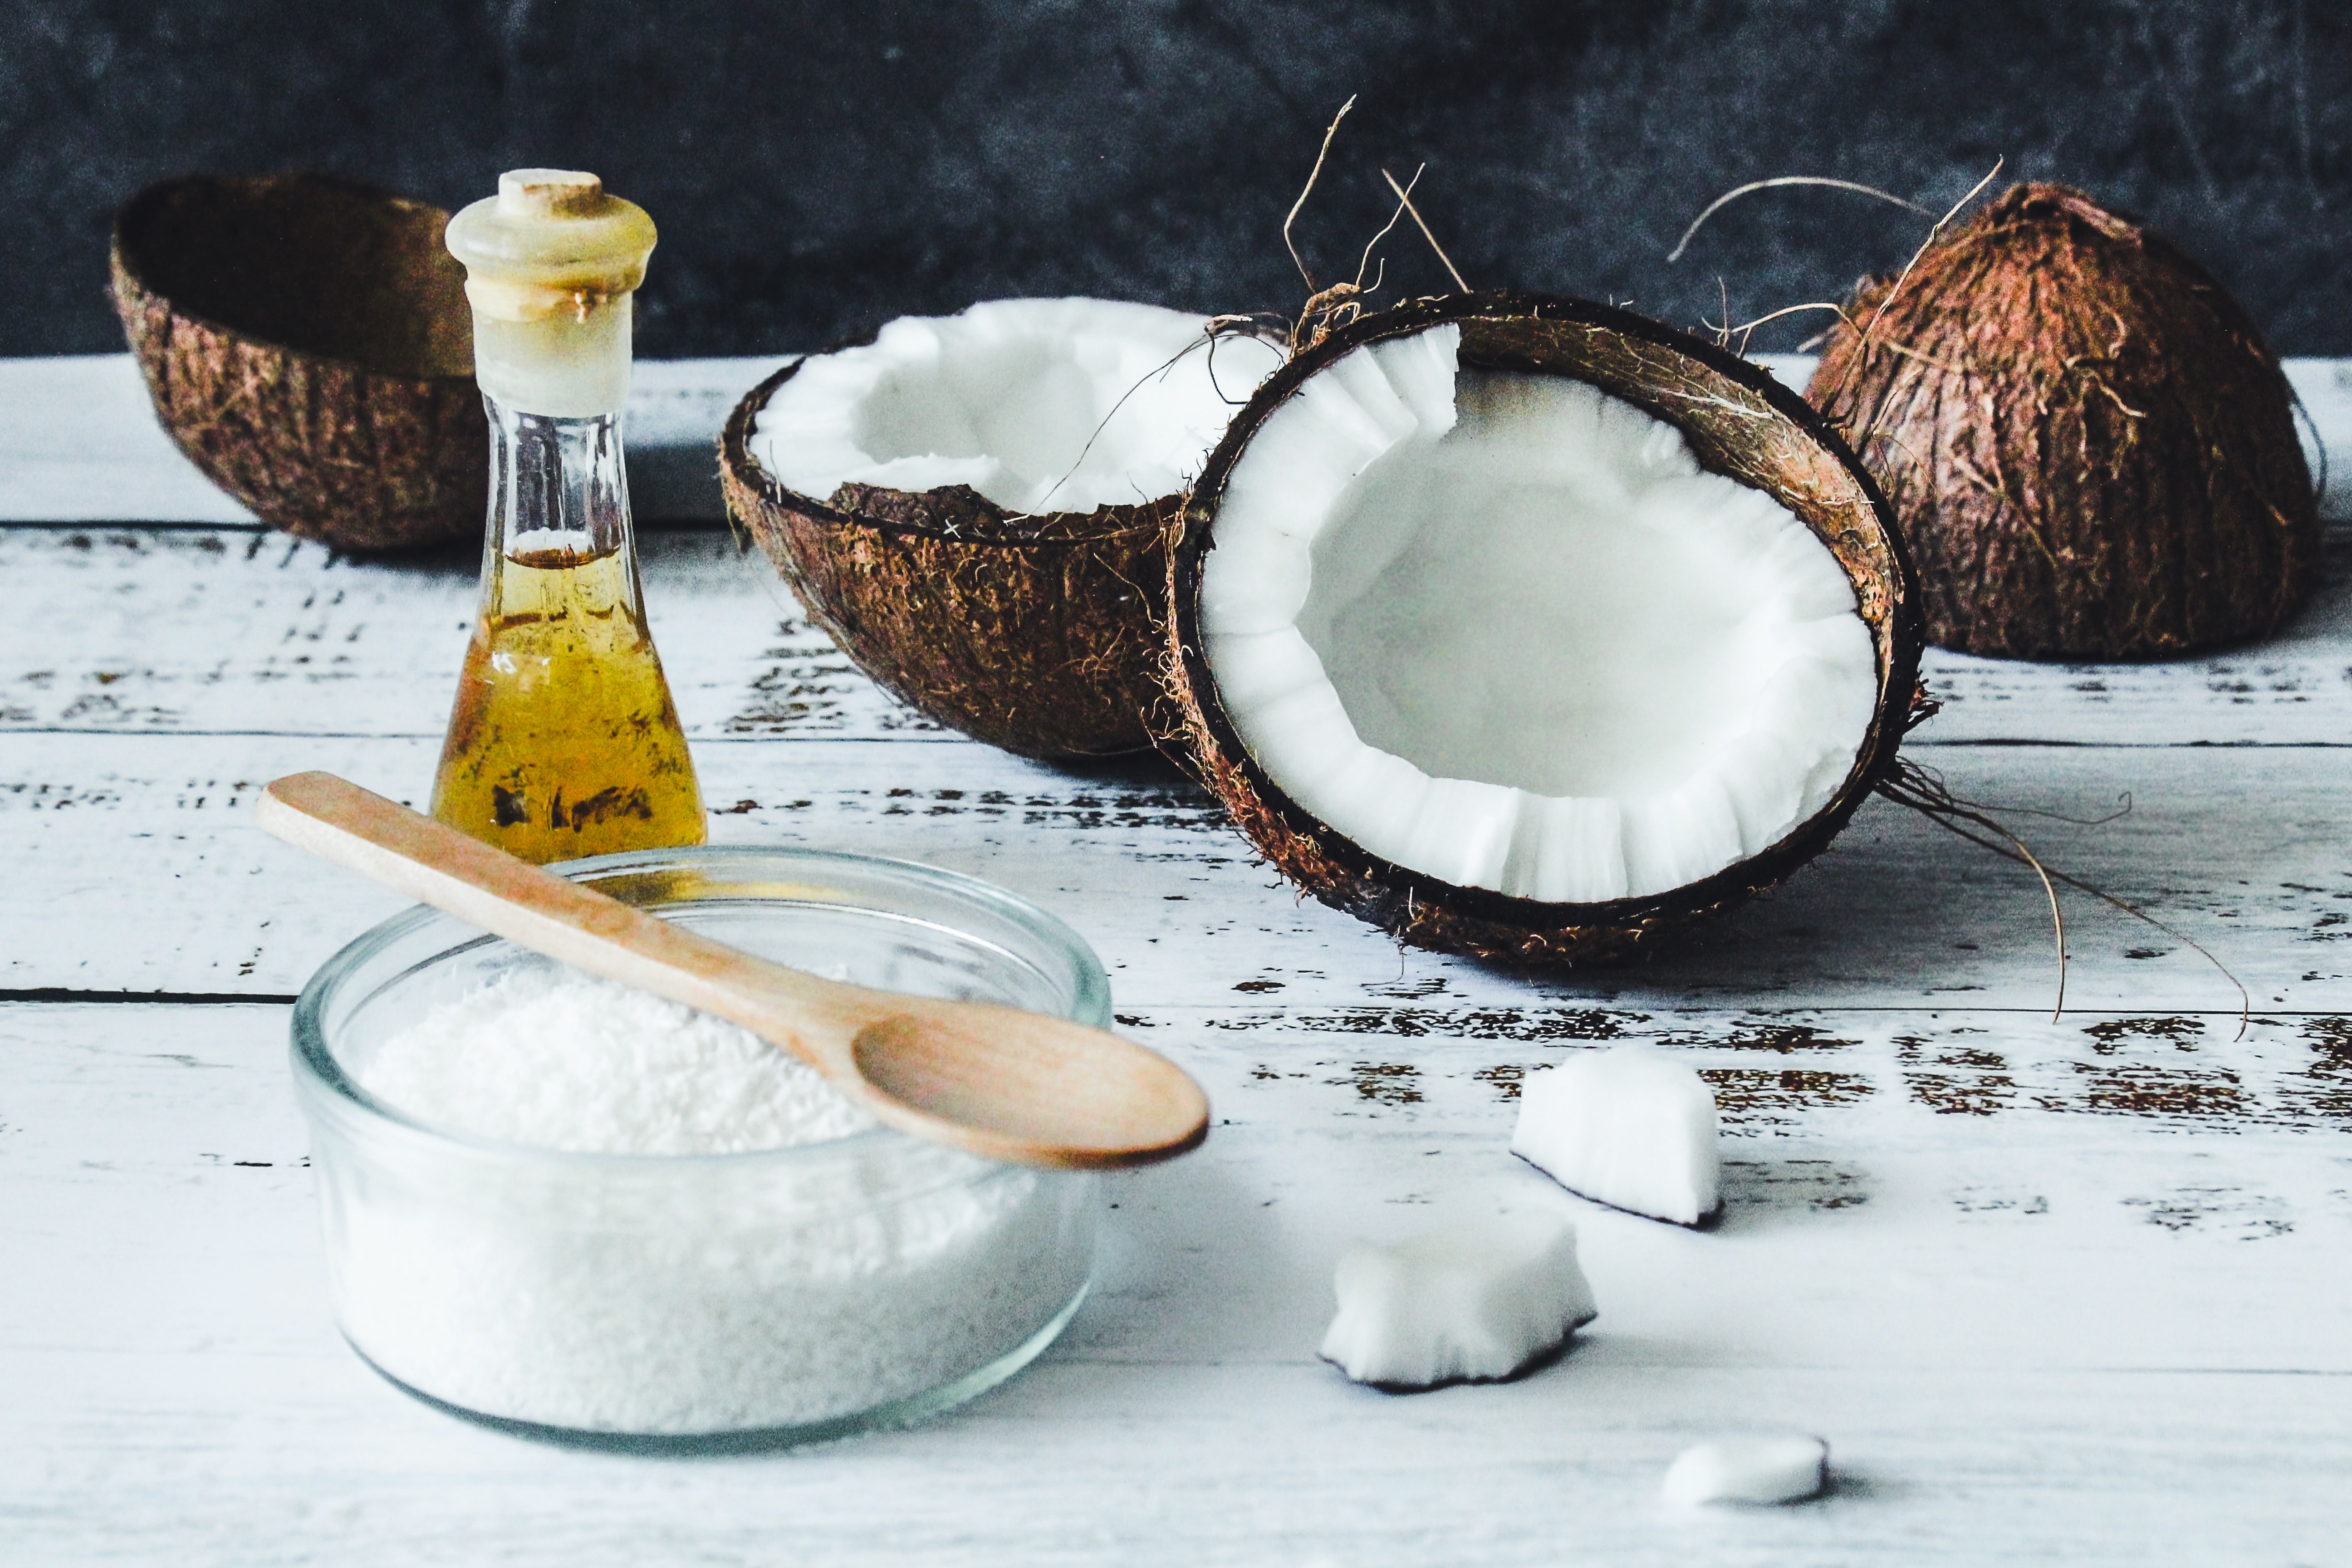 coconuts cut in half with liquid and solid coconut oil in bowls